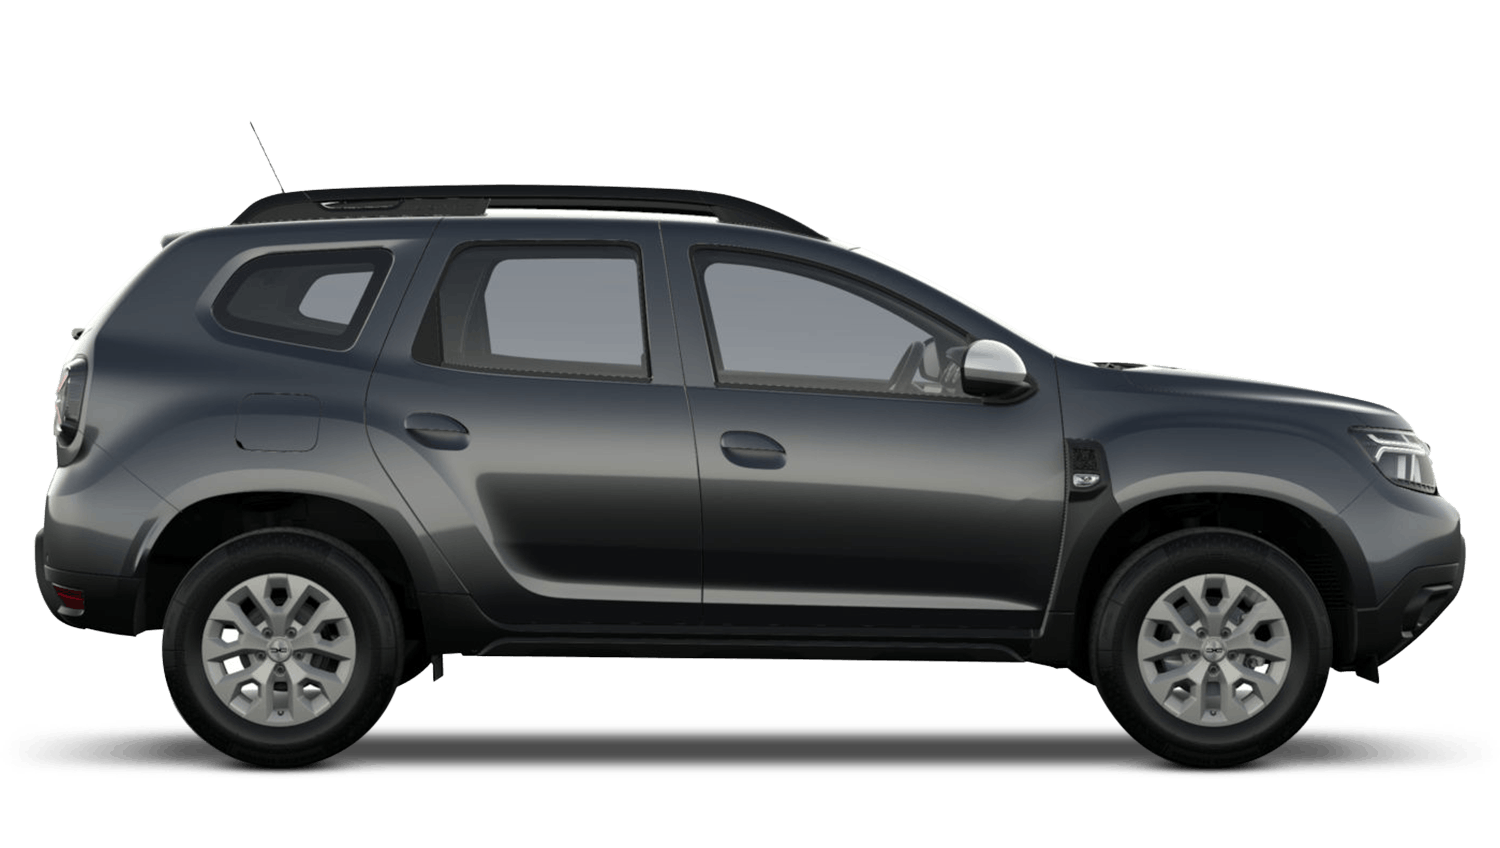 Dacia Duster | SUV by nature